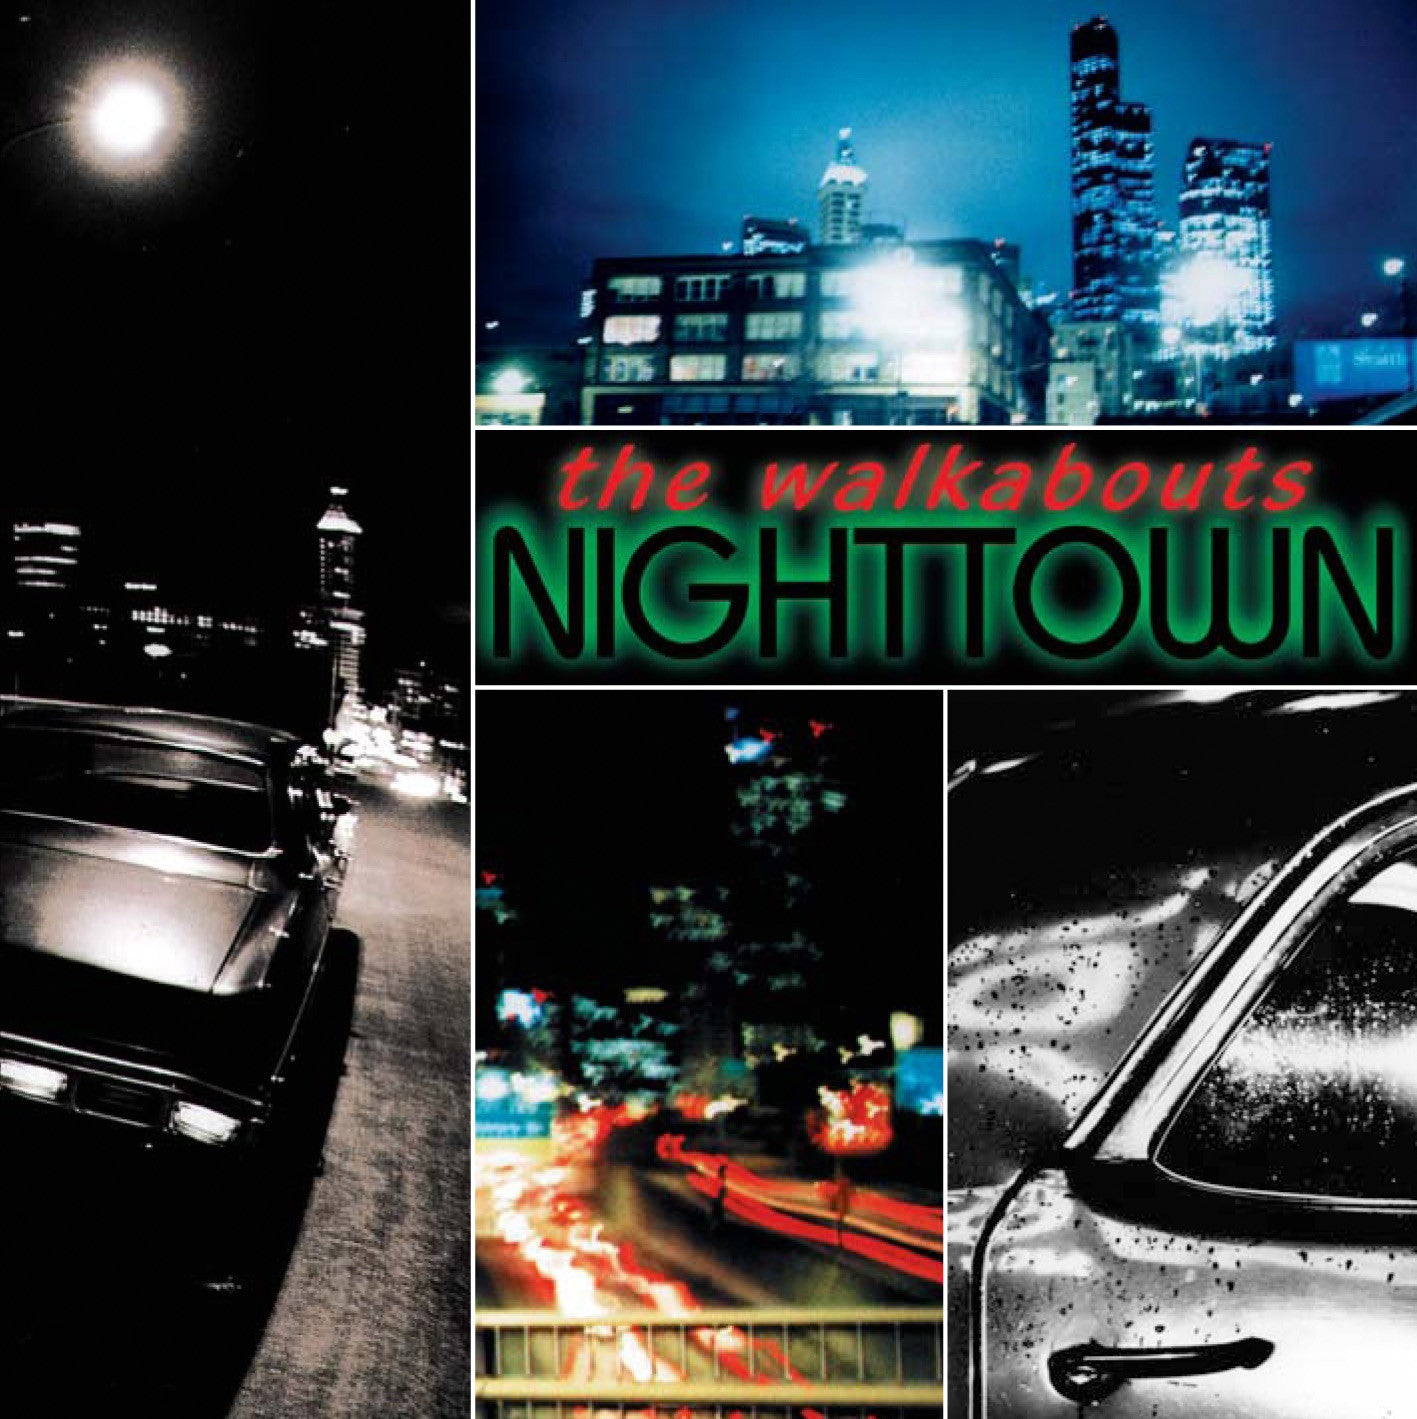 Walkabouts - Nighttown